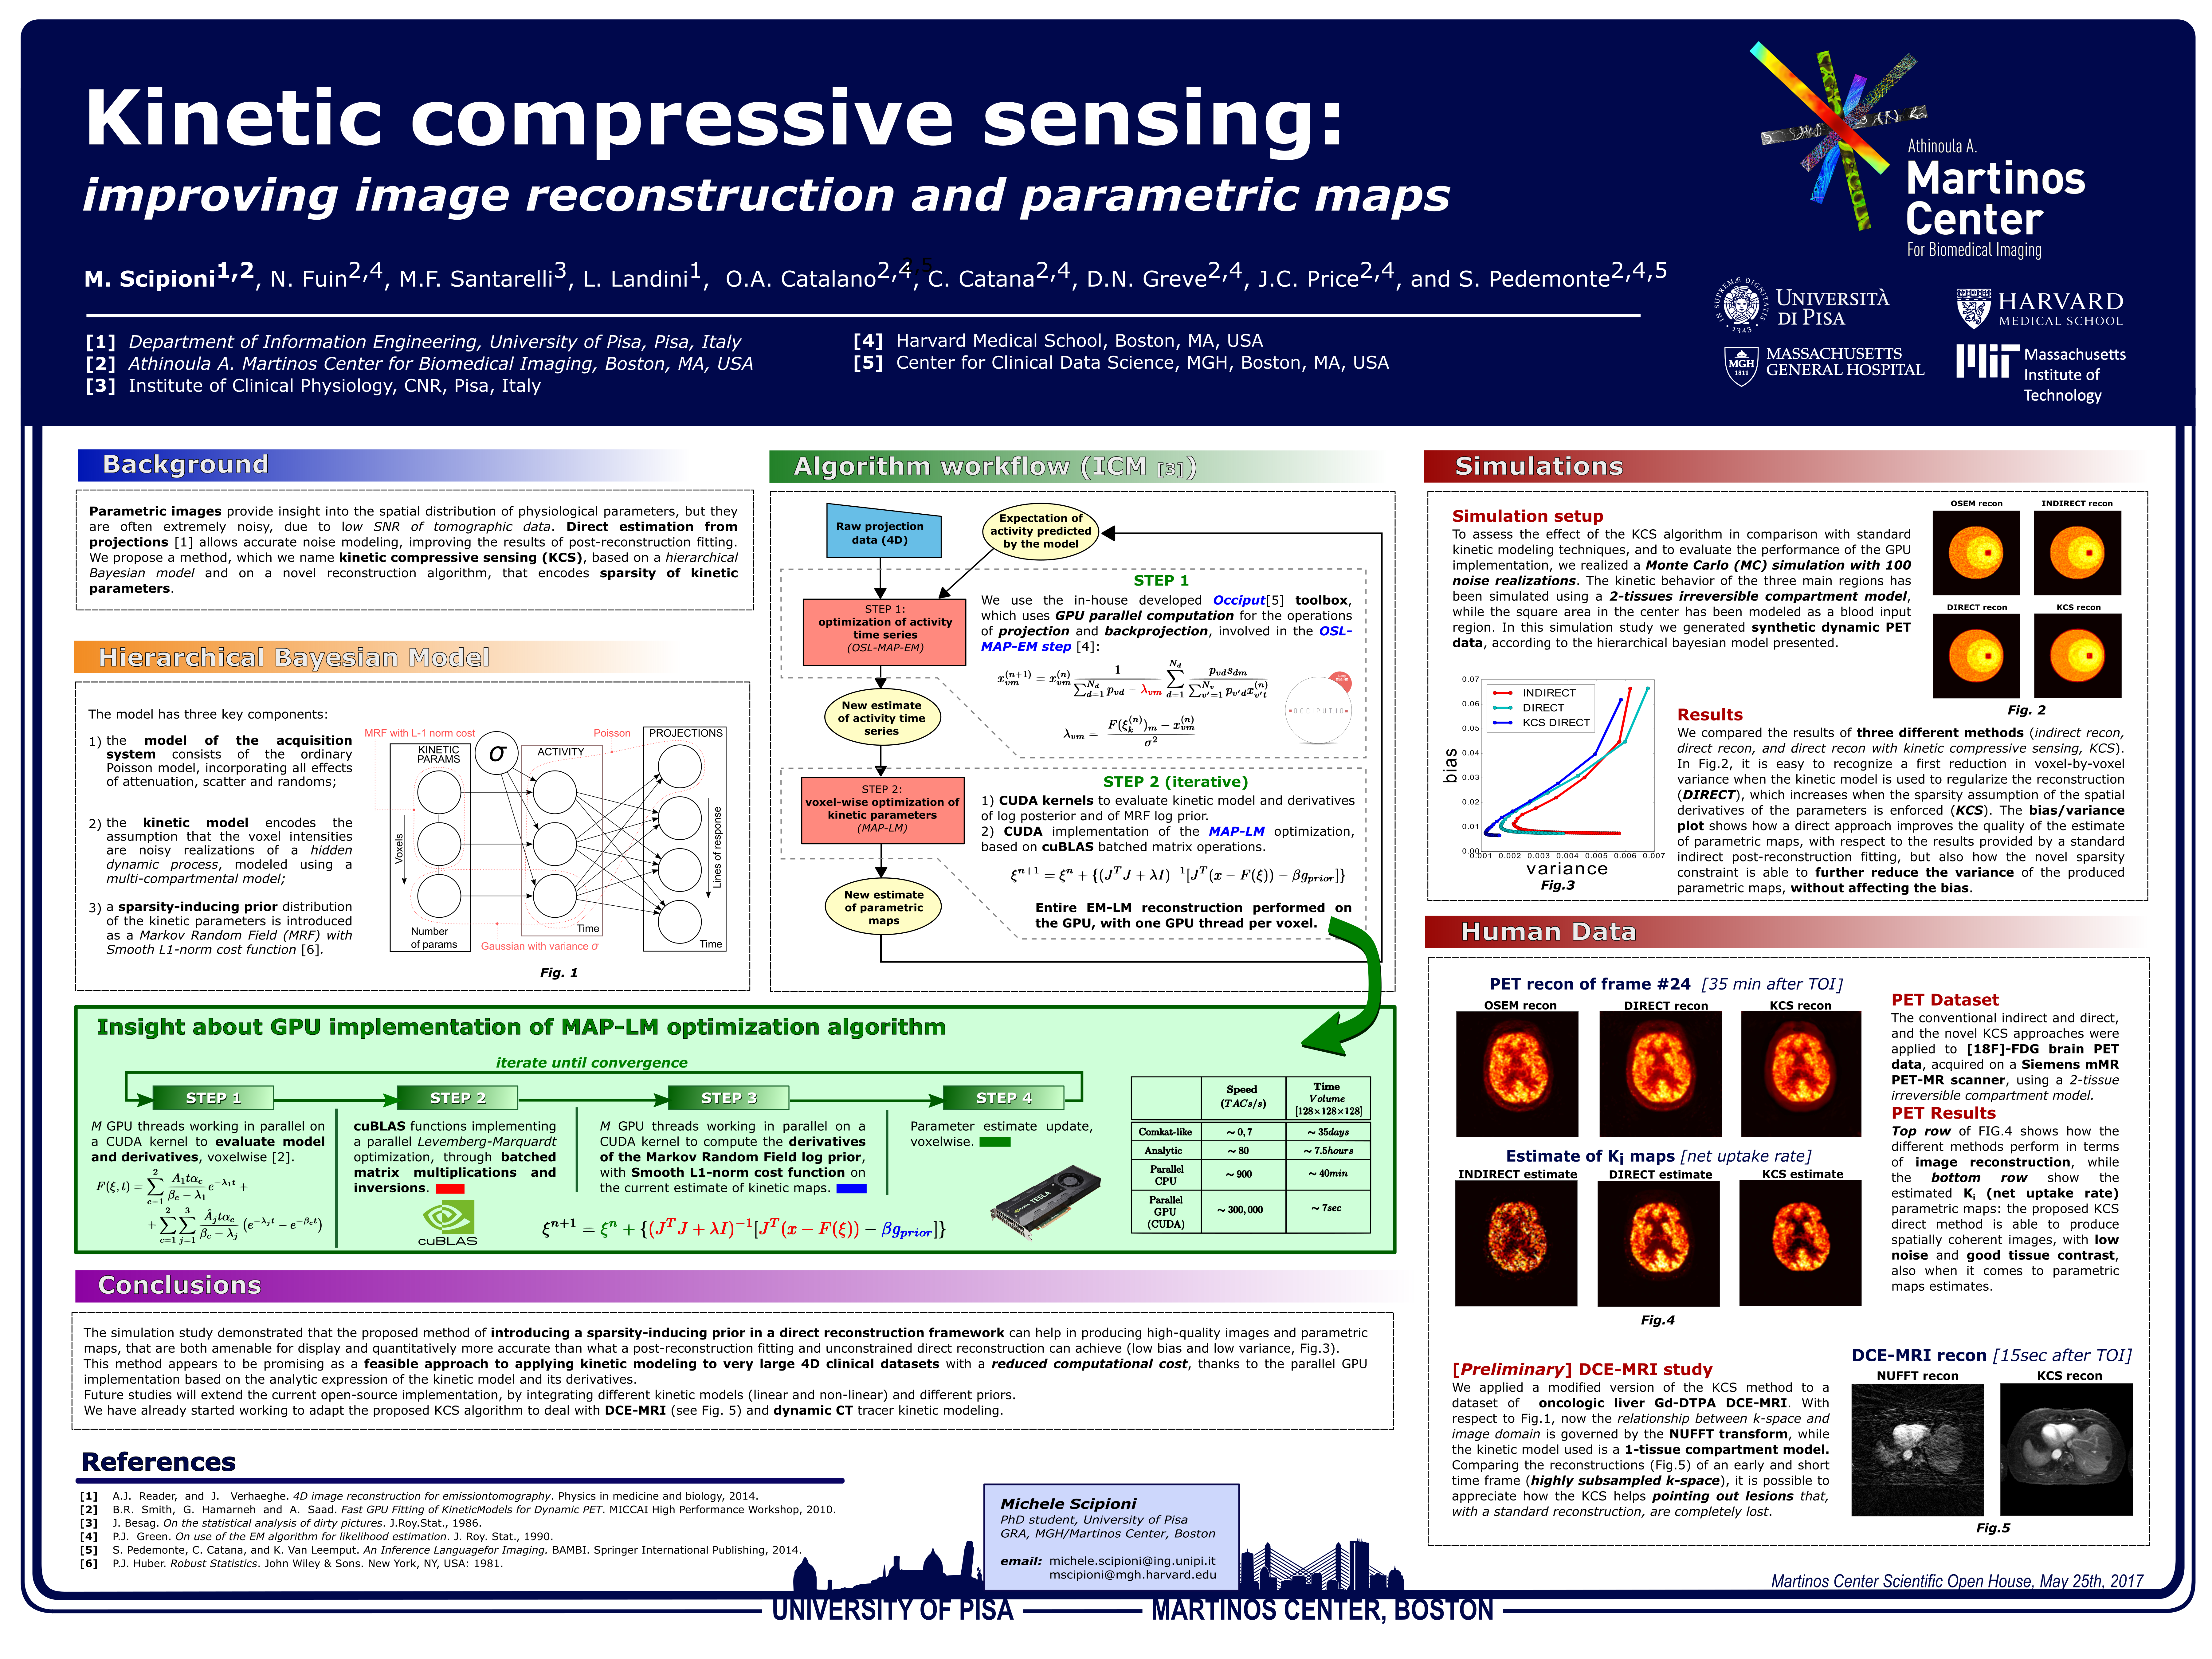 Kinetic compressive sensing: improving image reconstruction and parametric maps - Athinoula A. Martinos Center Scientific Open House 2017 - poster